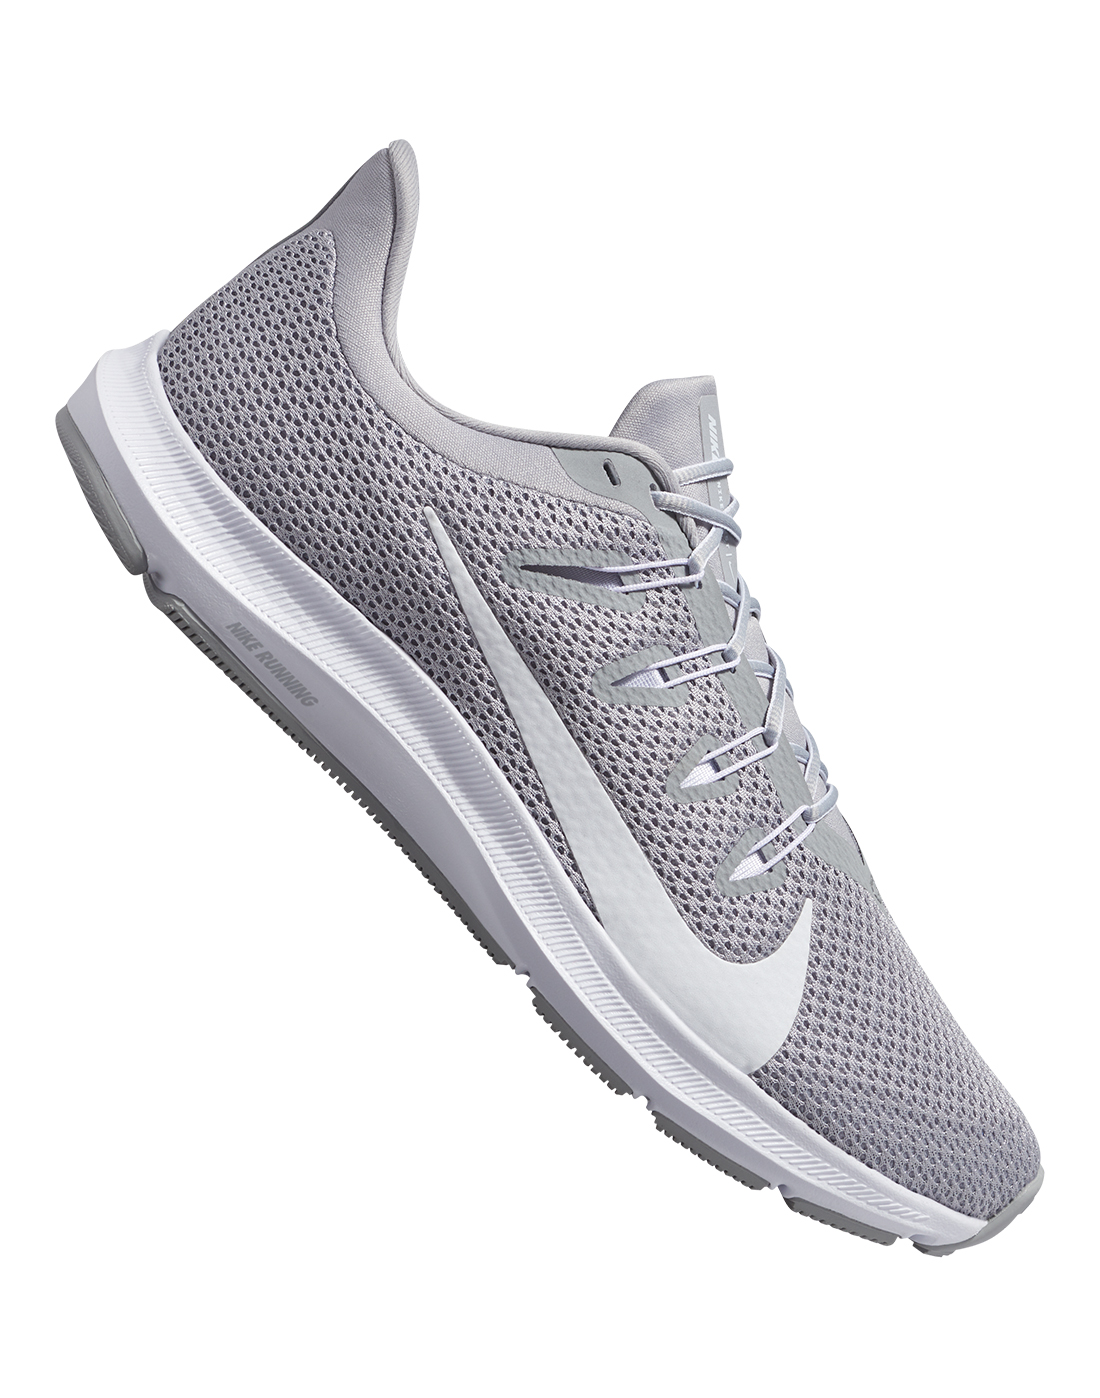 Nike Mens Quest - Grey | Life Style 